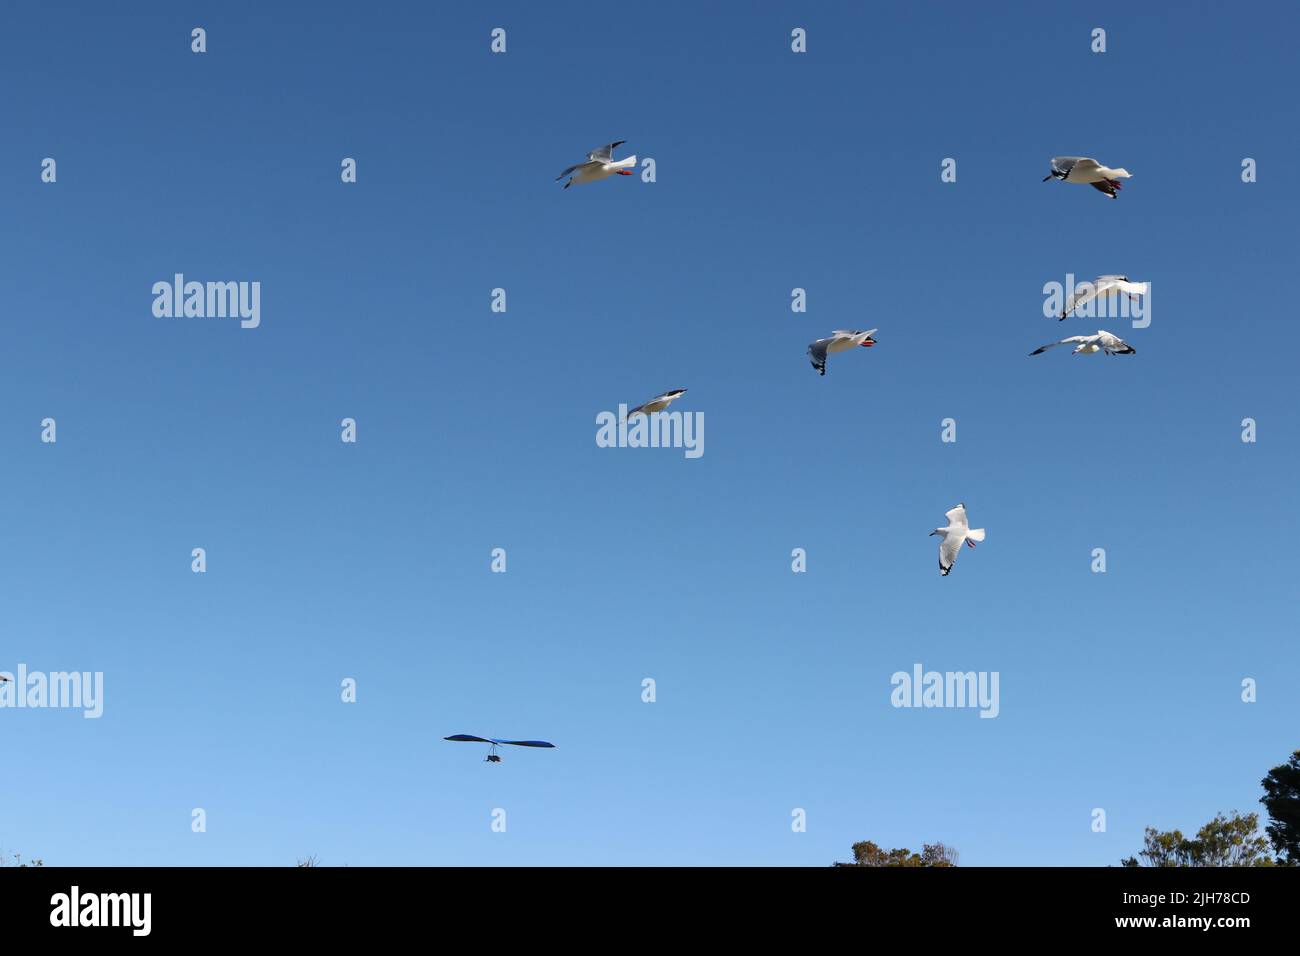 Hang glider in flight with seagulls Stock Photo